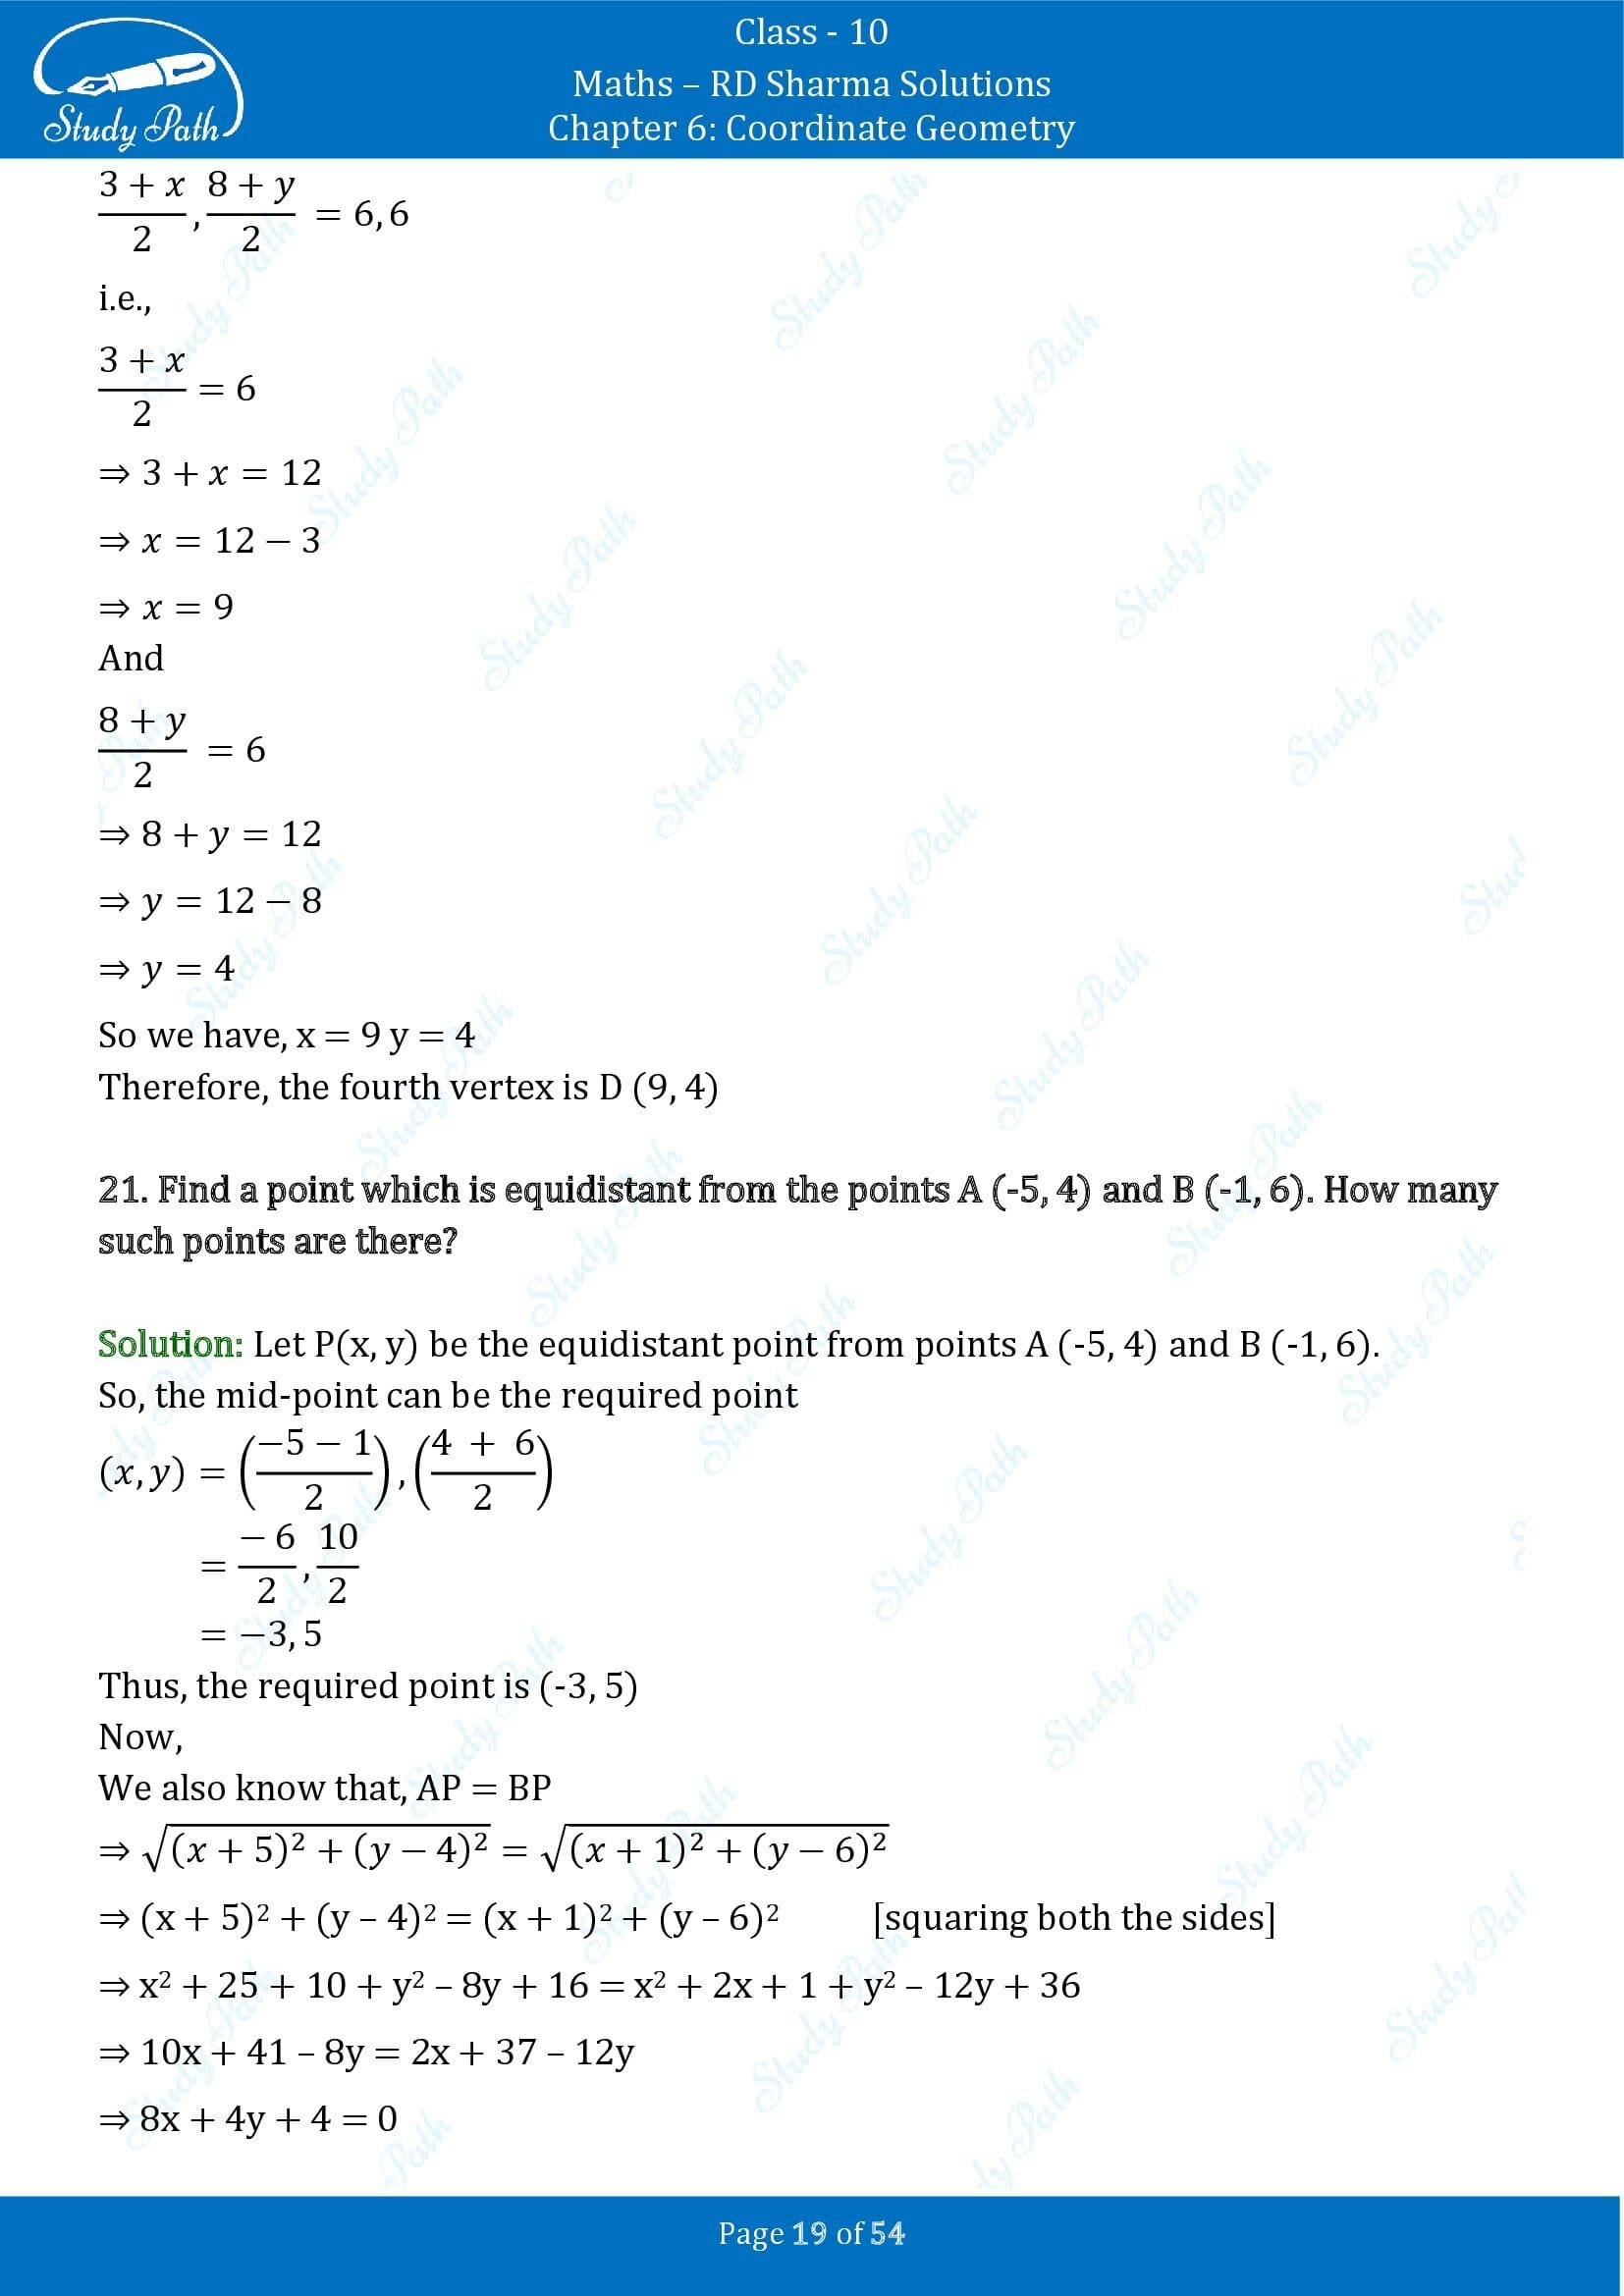 RD Sharma Solutions Class 10 Chapter 6 Coordinate Geometry Exercise 6.2 0019